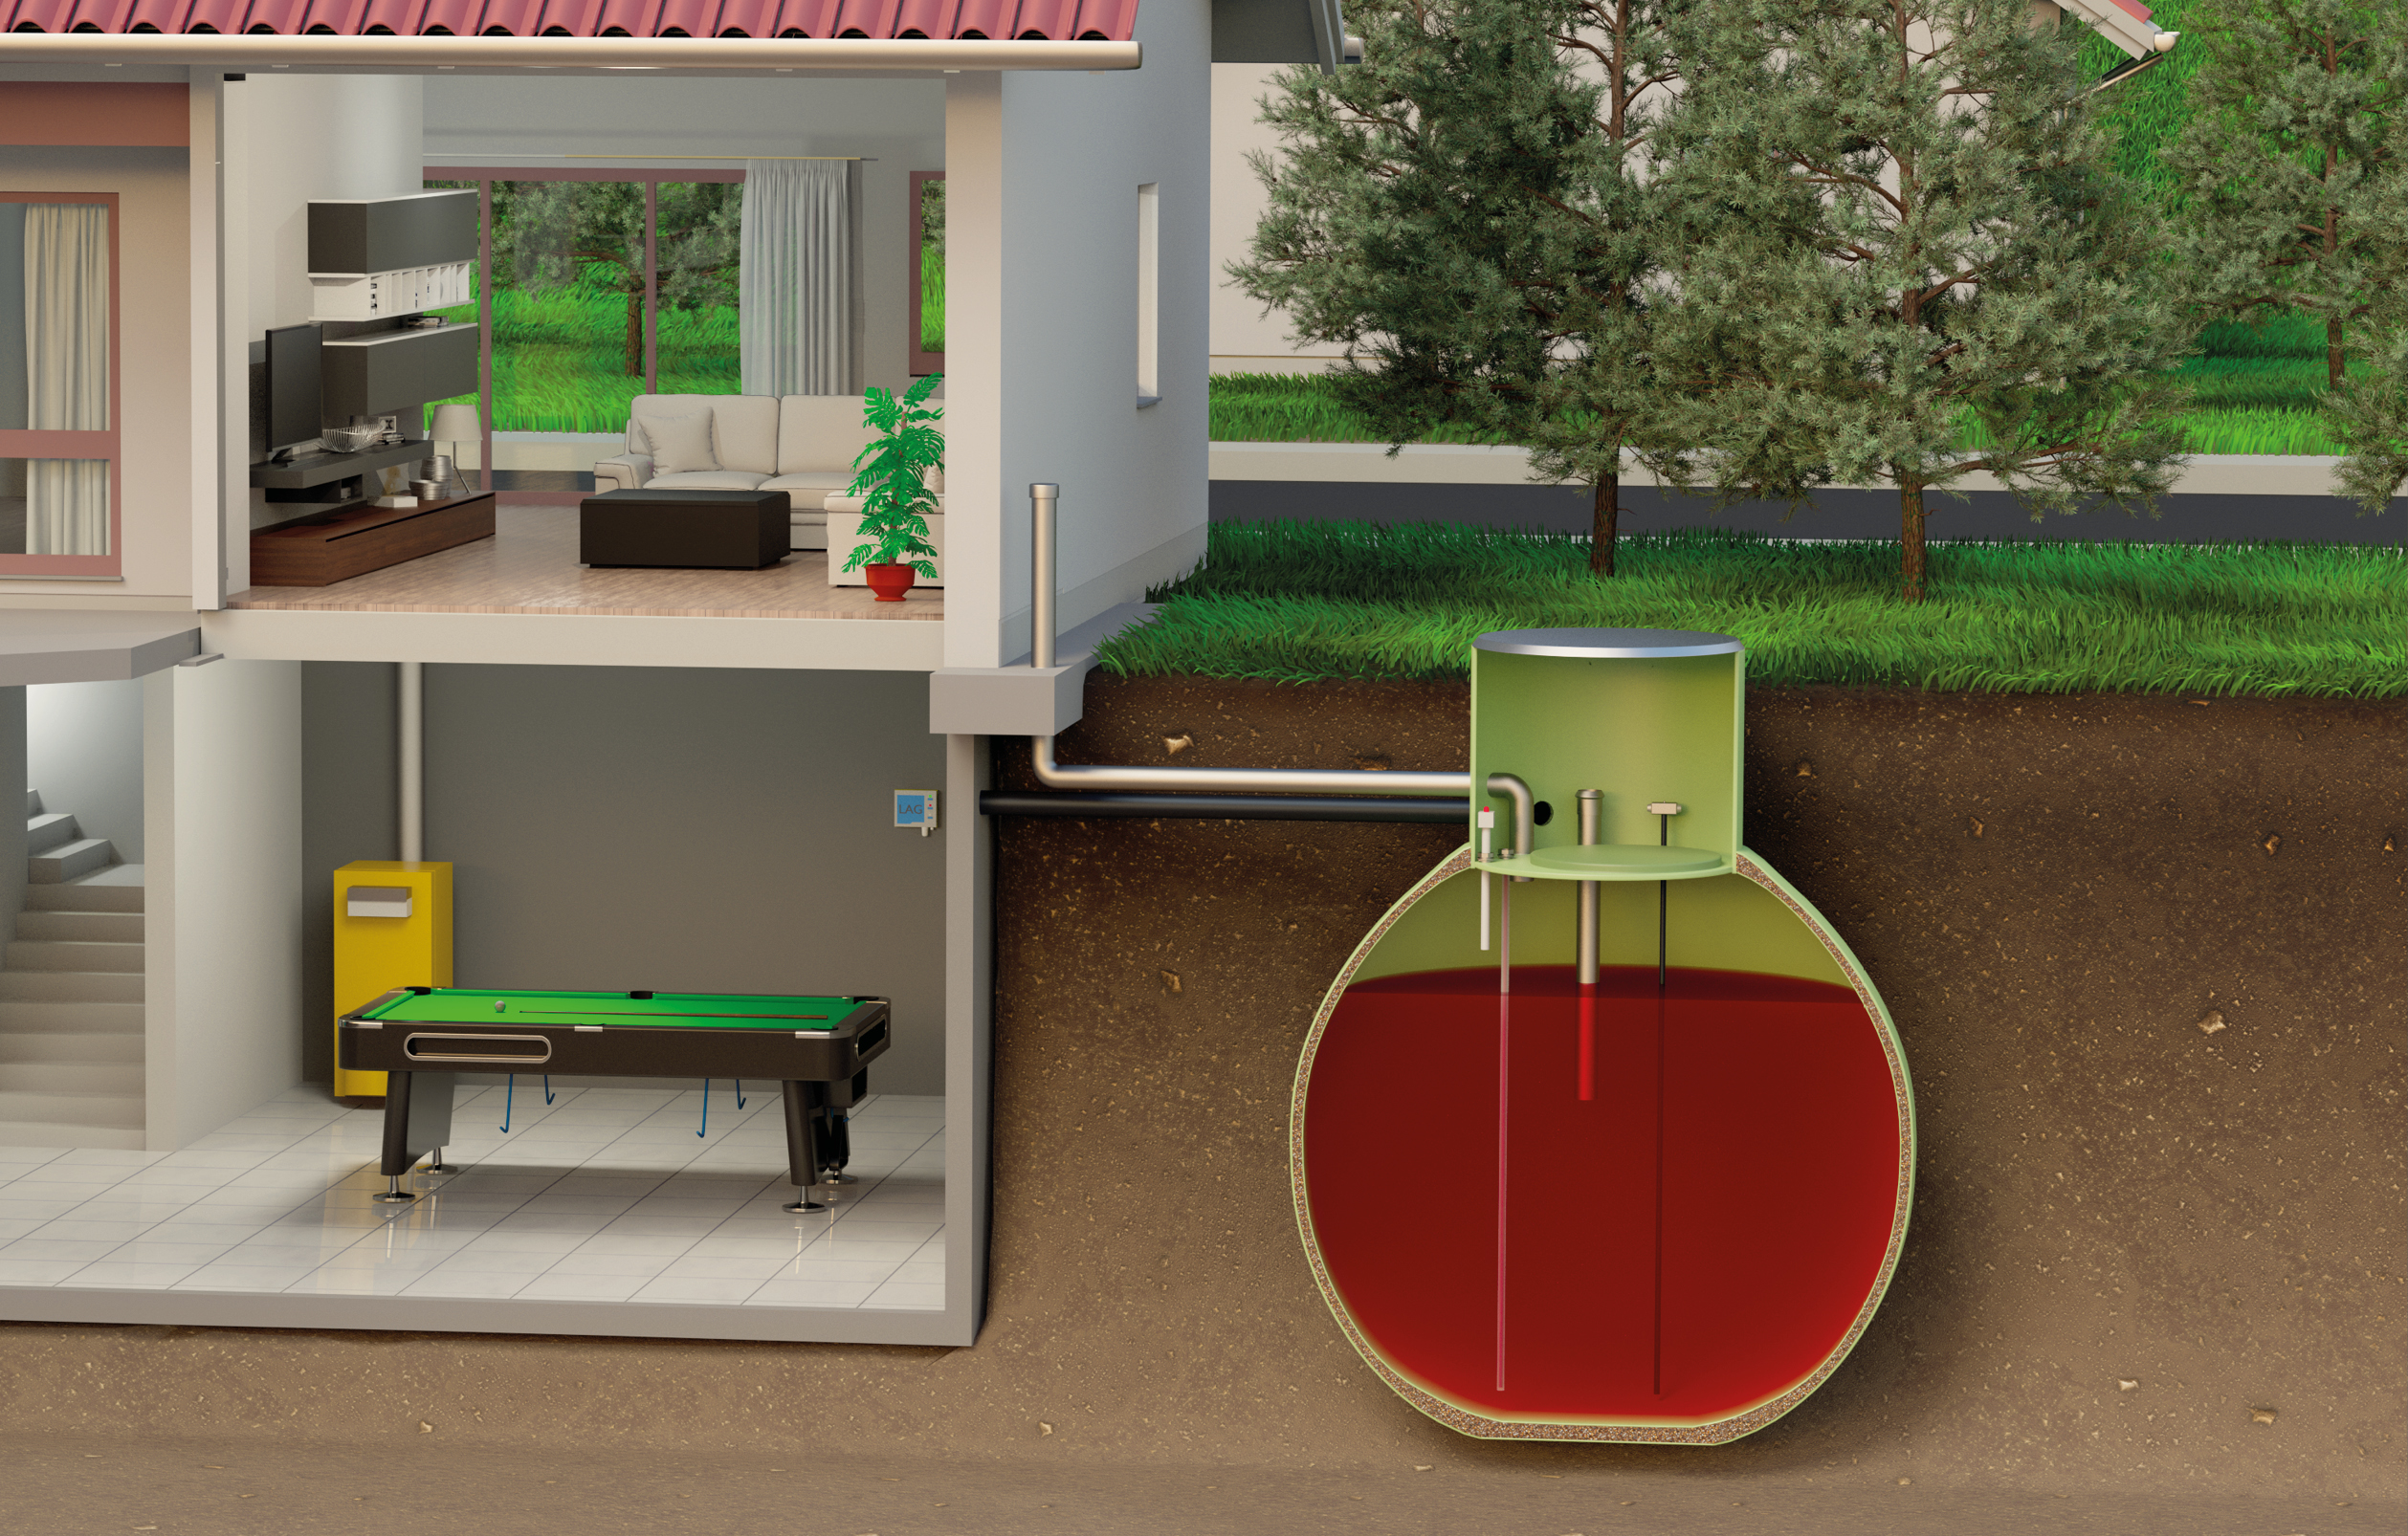 Storing heating oil with the Haase underground tank